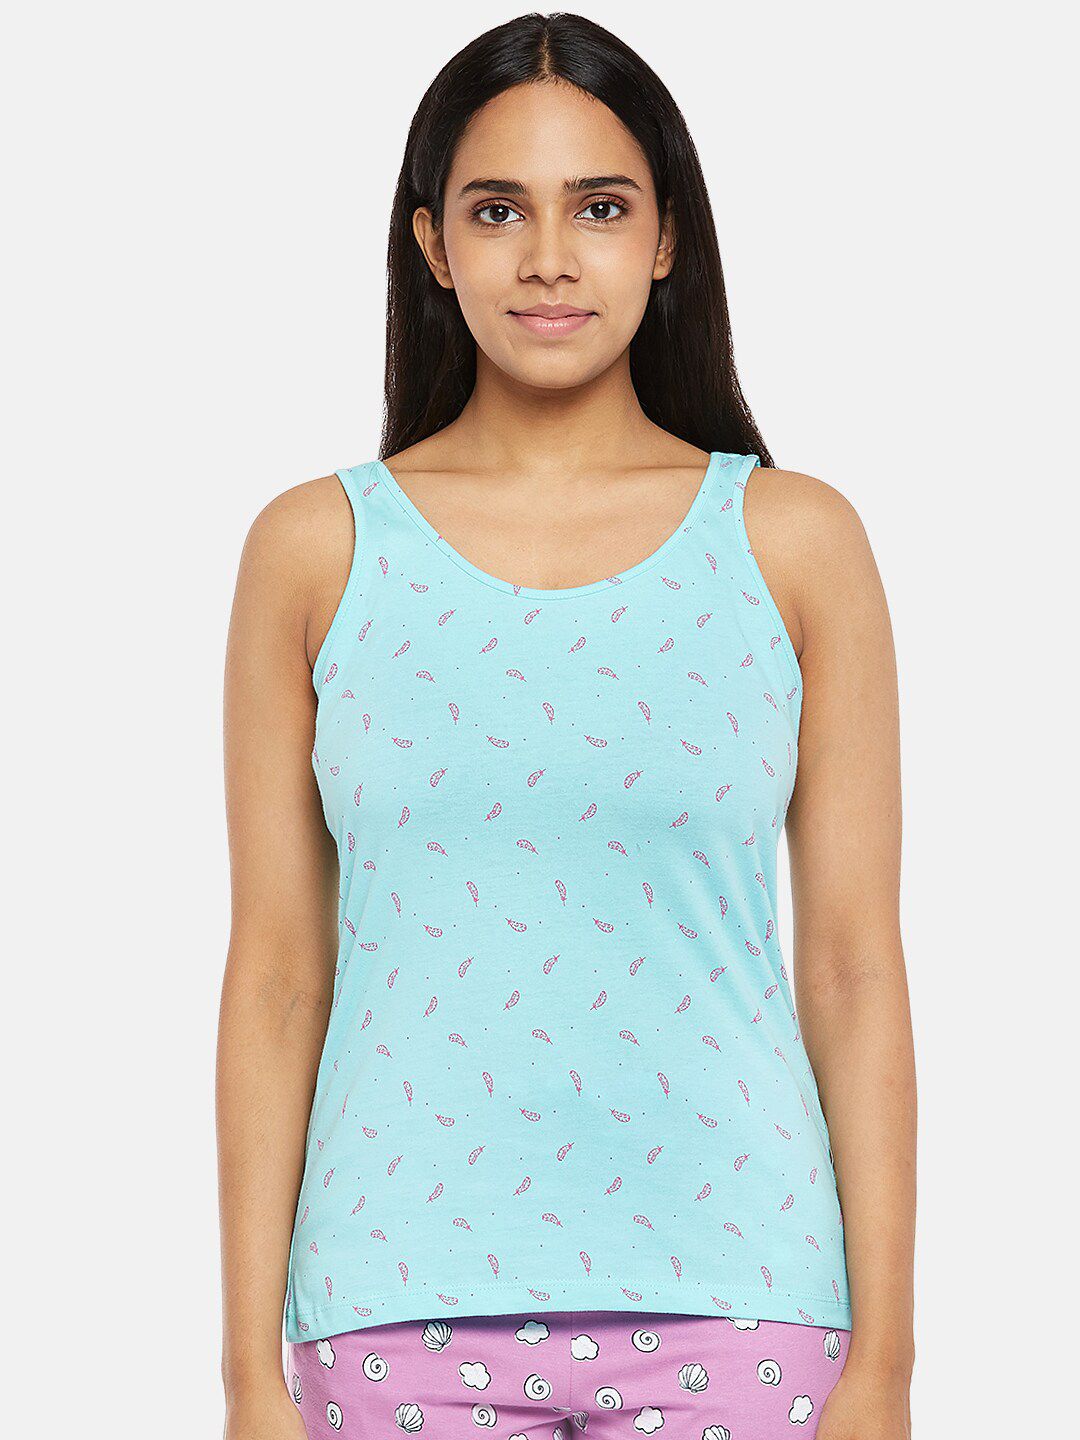 Dreamz by Pantaloons Turquoise Blue & Pink Tank Lounge tshirt Price in India